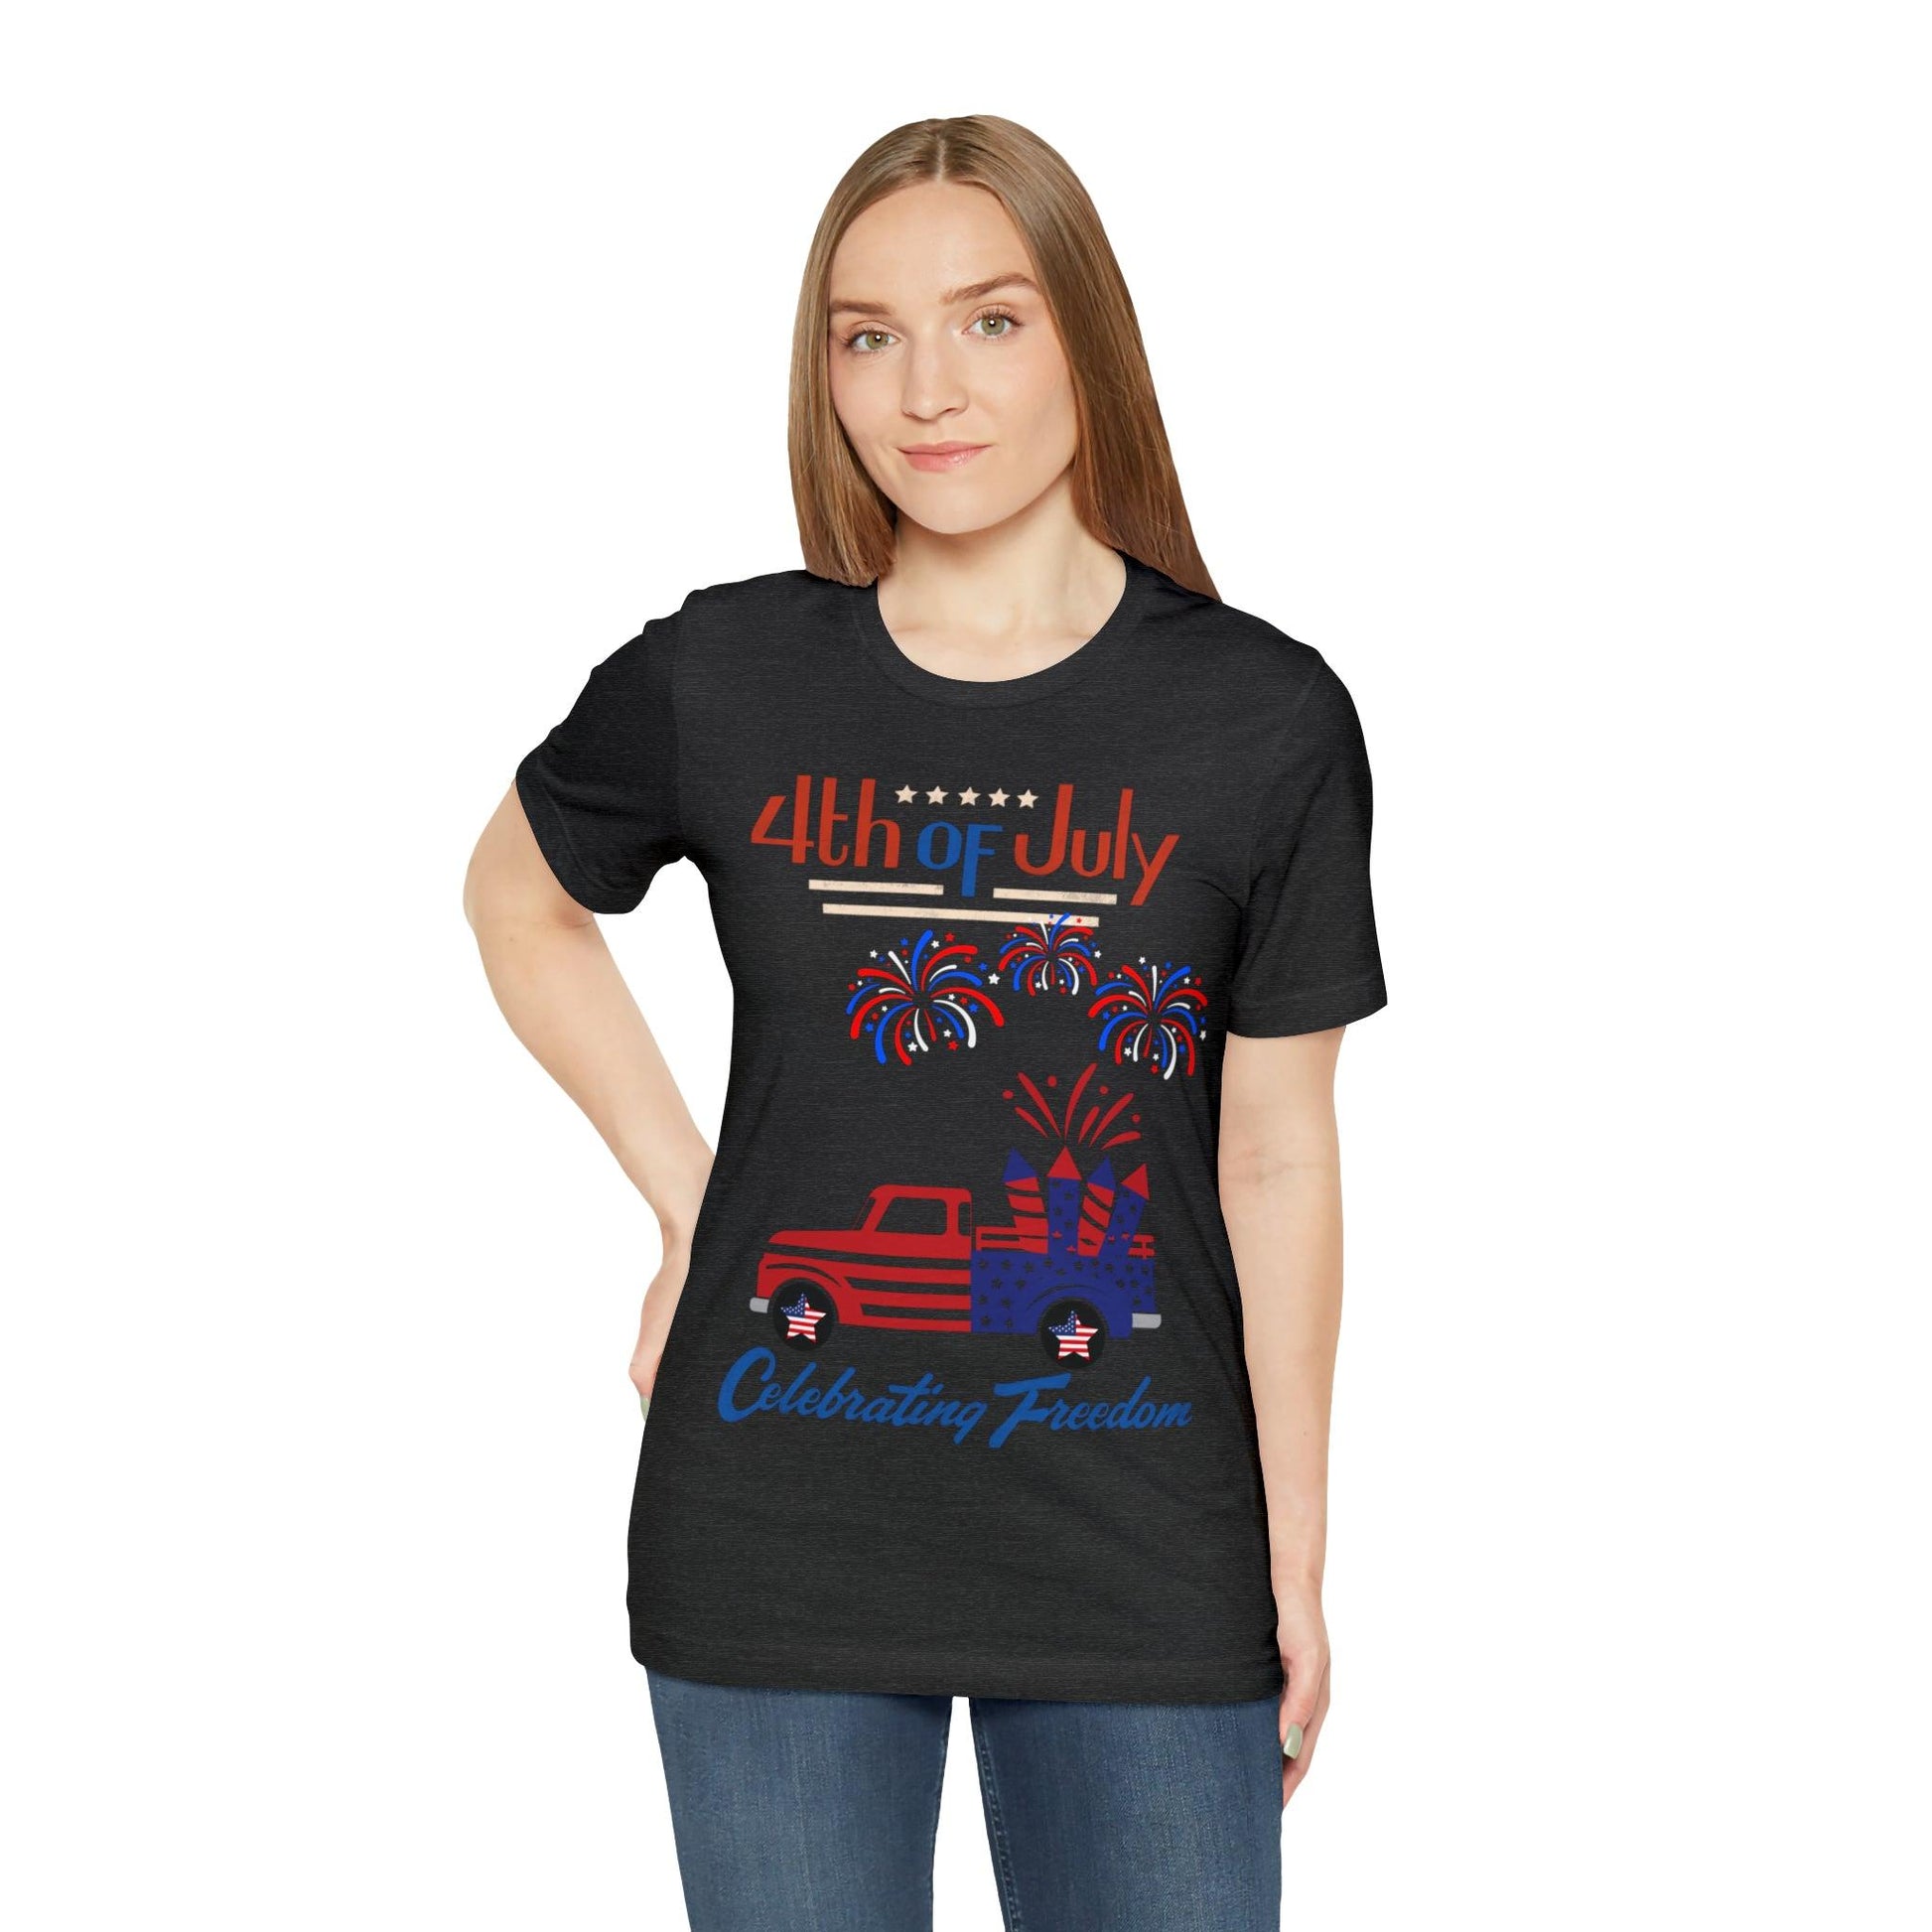 Celebrate Independence Day with Patriotic Shirts: 4th of July Shirts for Women and Men, Fireworks, Freedom, and Patriotic Designs - Giftsmojo